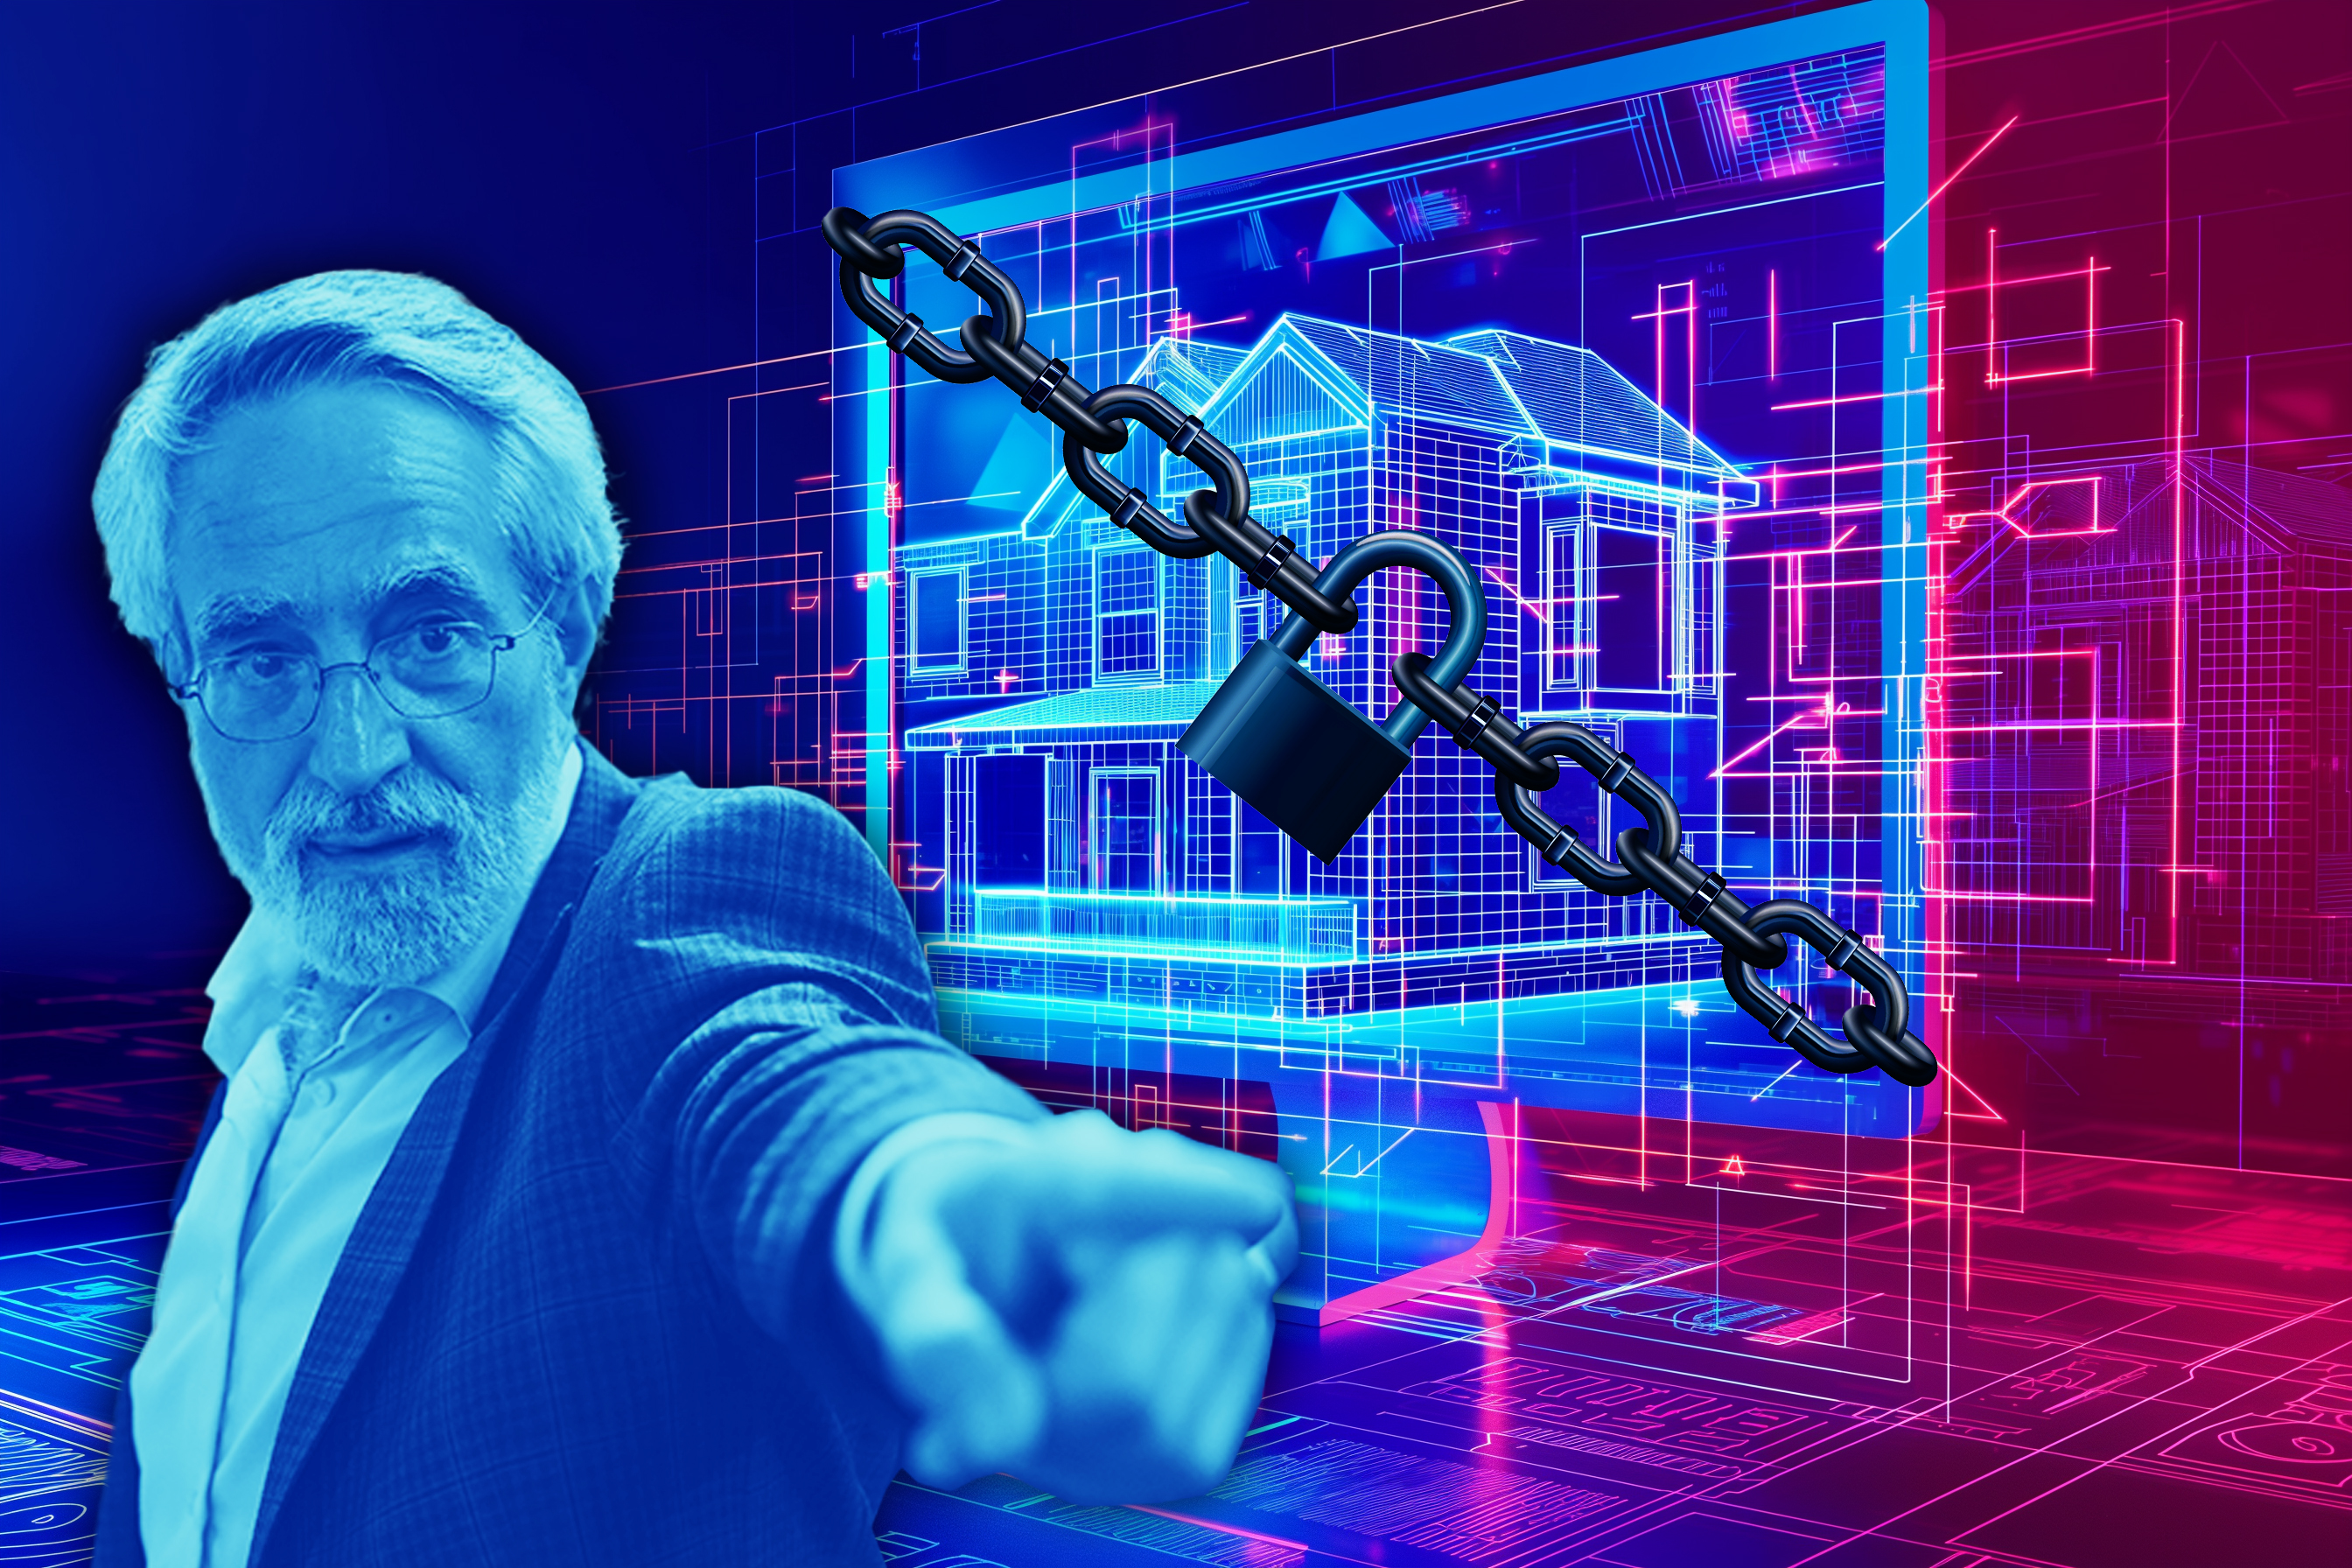 An older man points towards the viewer, with a digital blue house design behind him, secured with a chain and padlock in a technological, neon-lit setting.